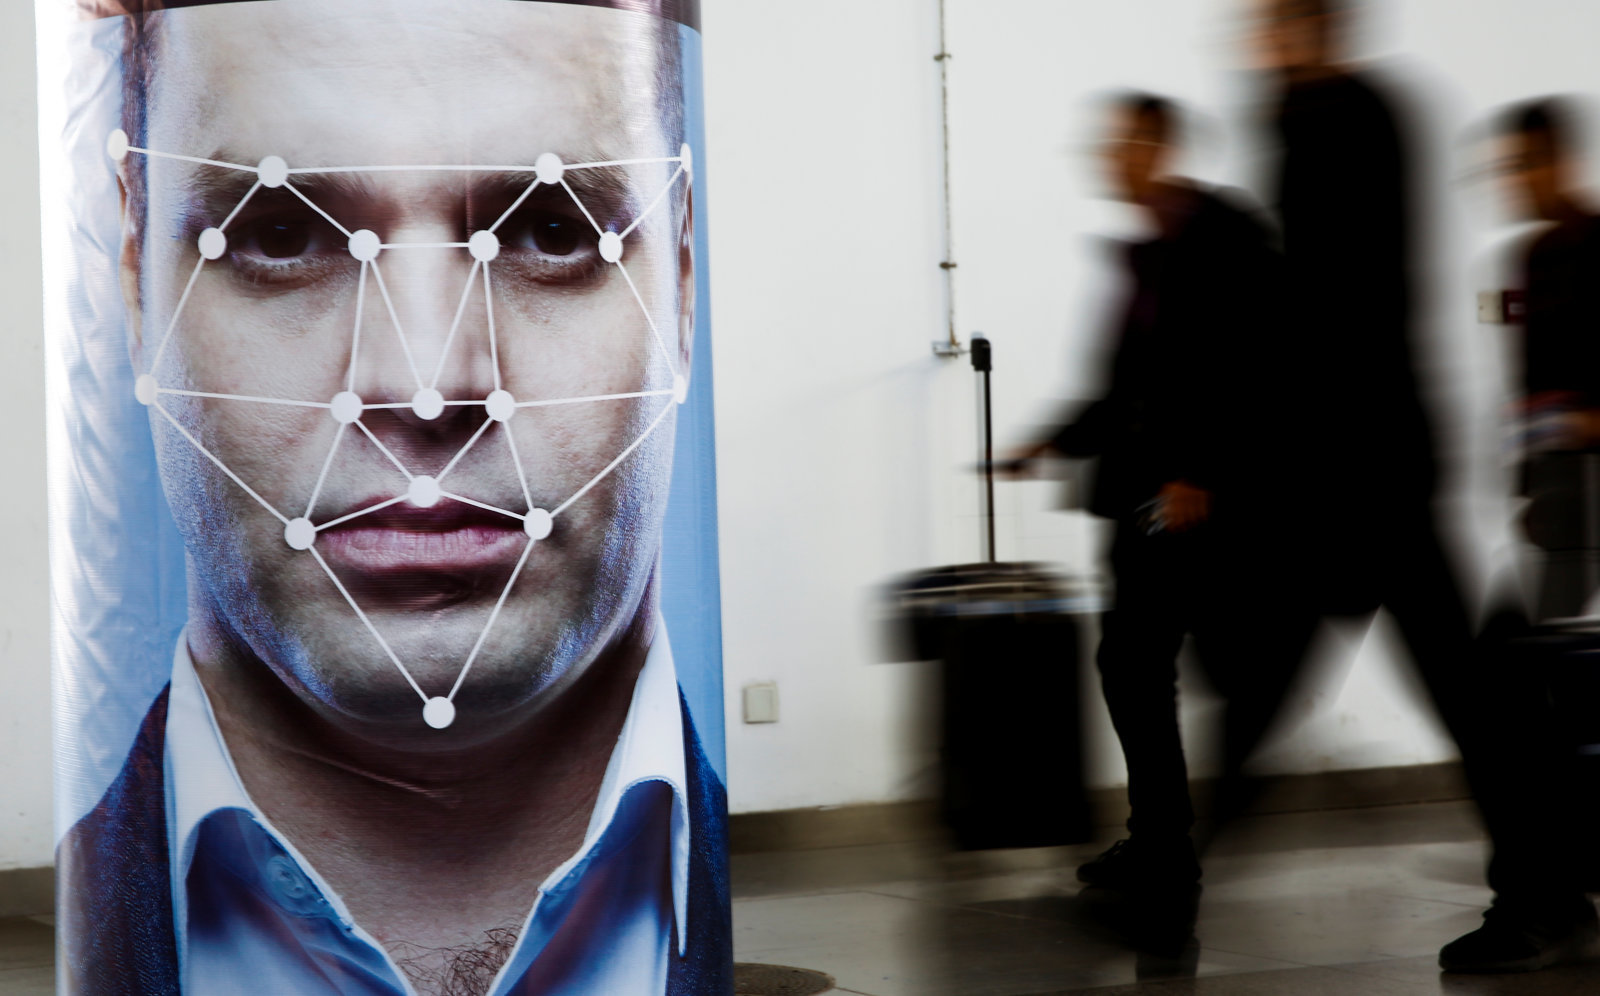 Microsoft didn’t want to sell its facial recognition tech to California police